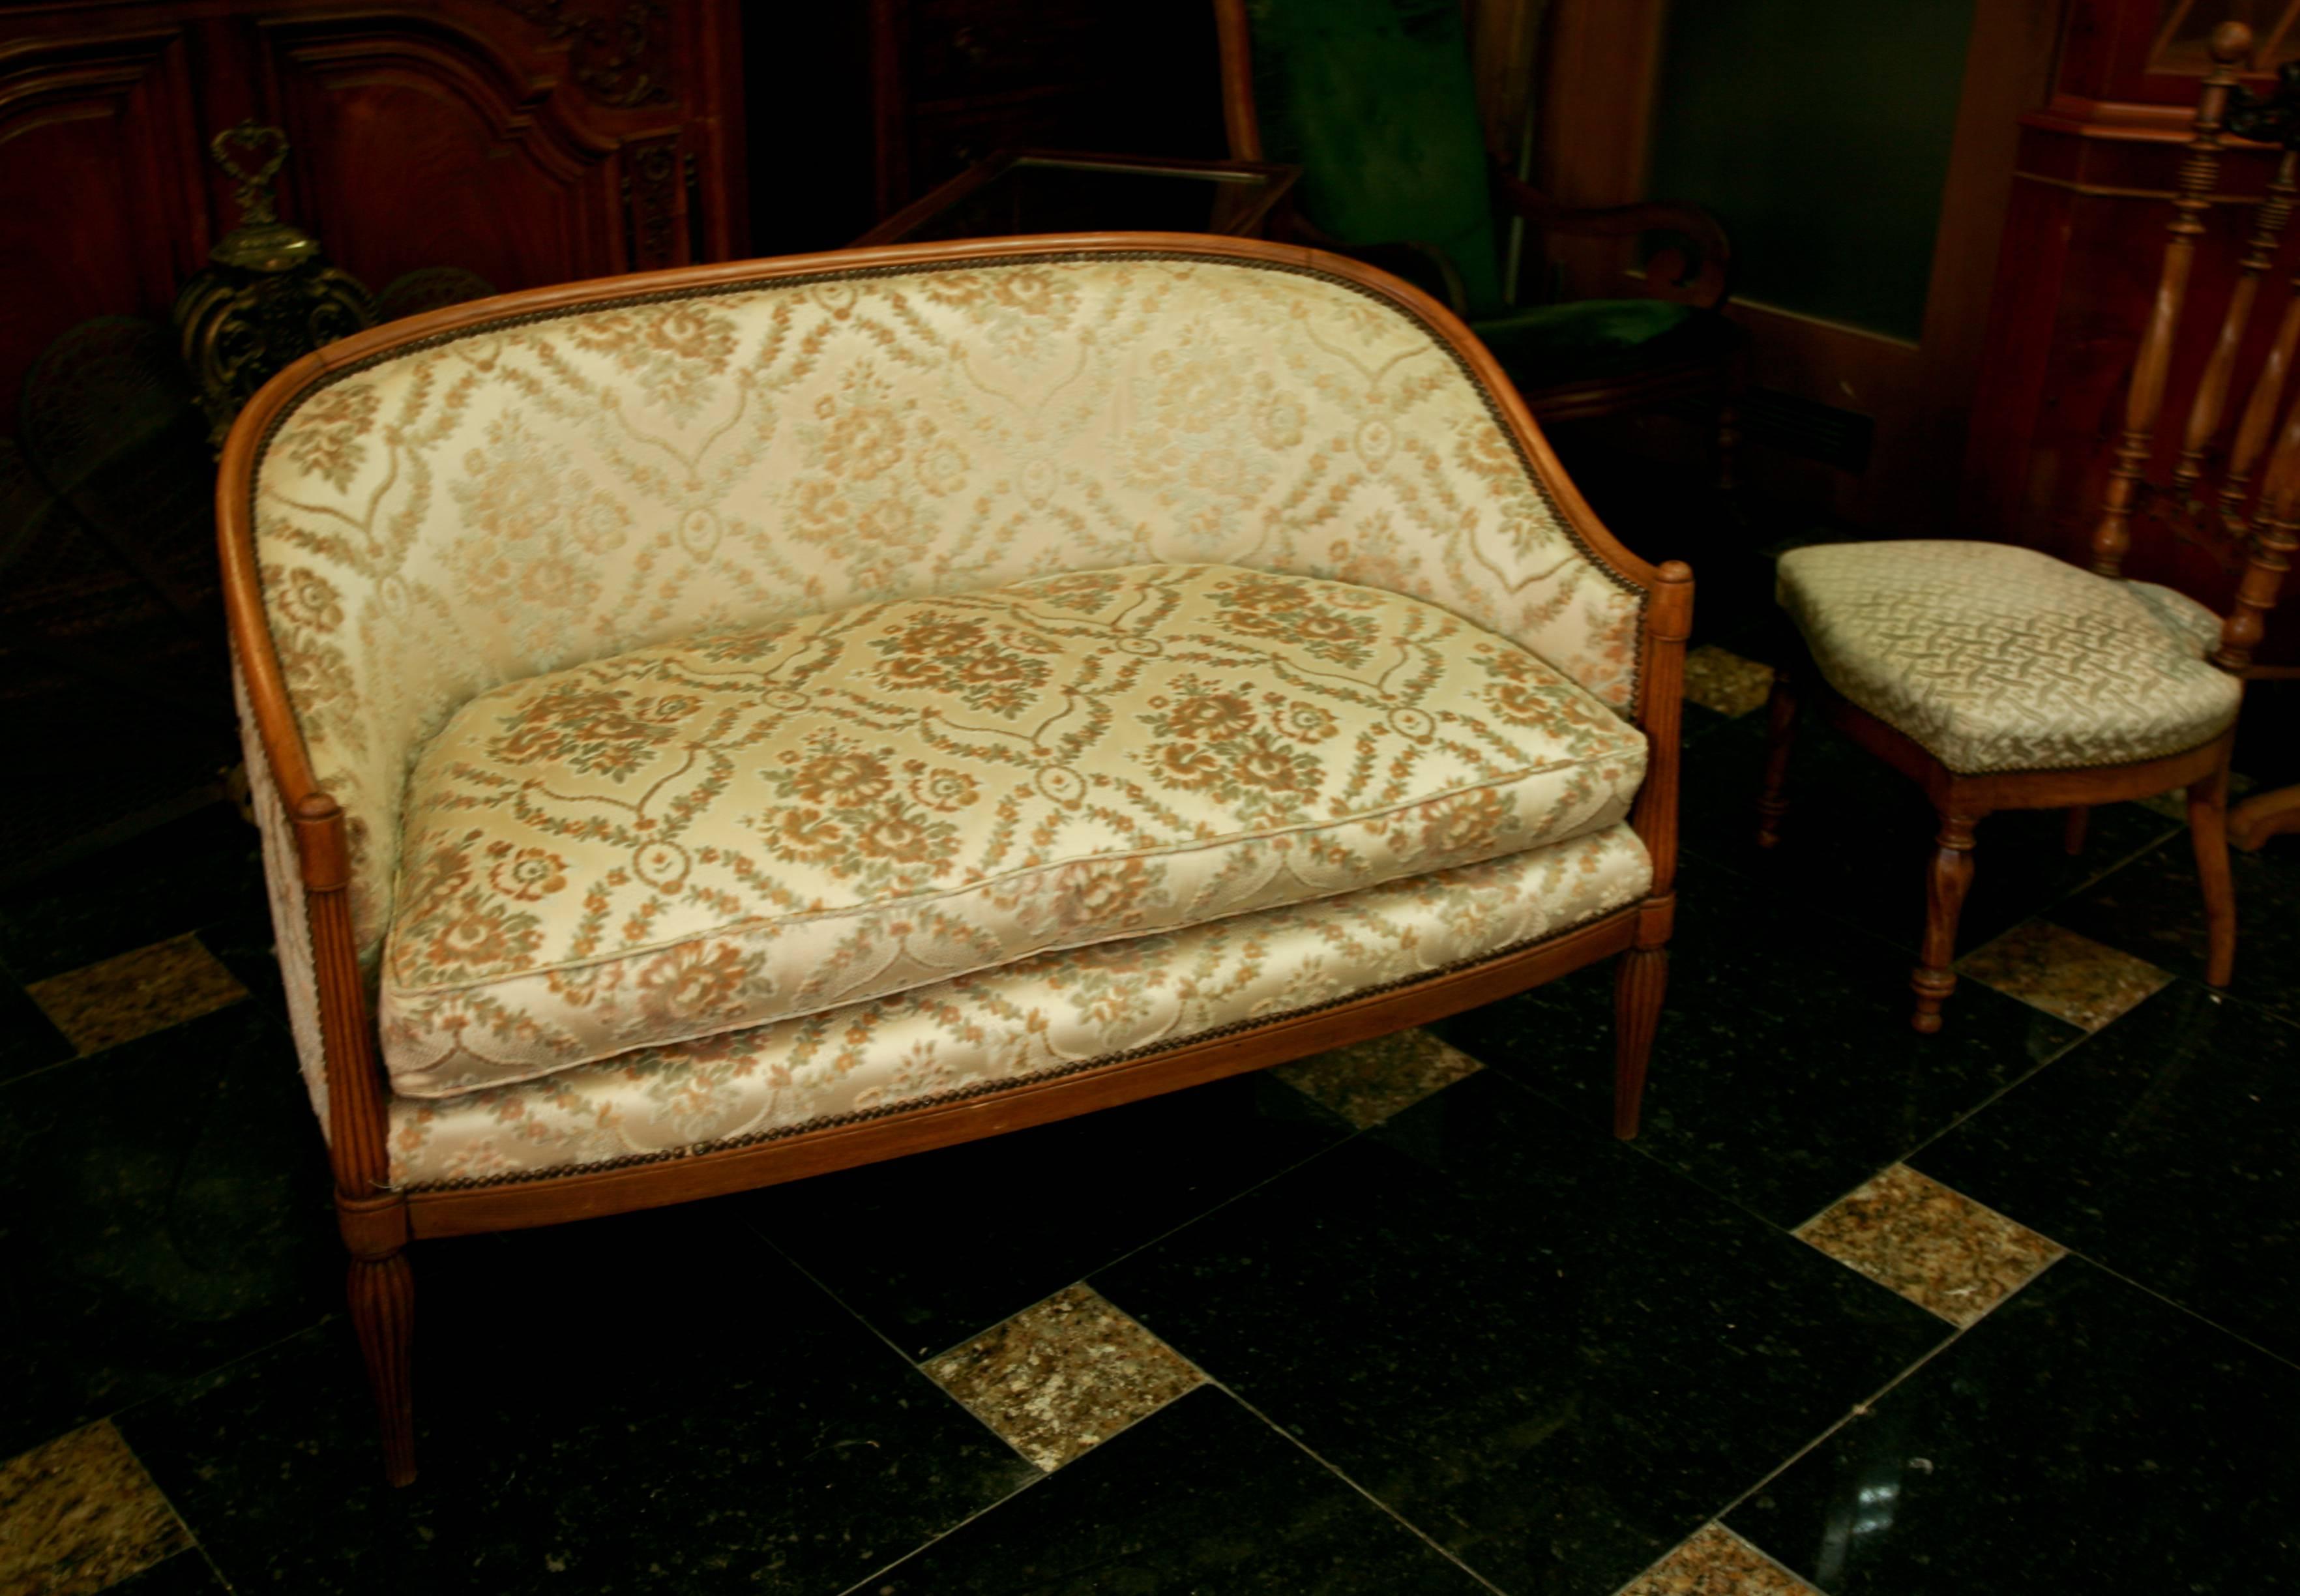 19th century French canapé with silk upholstery,
circa 1890.